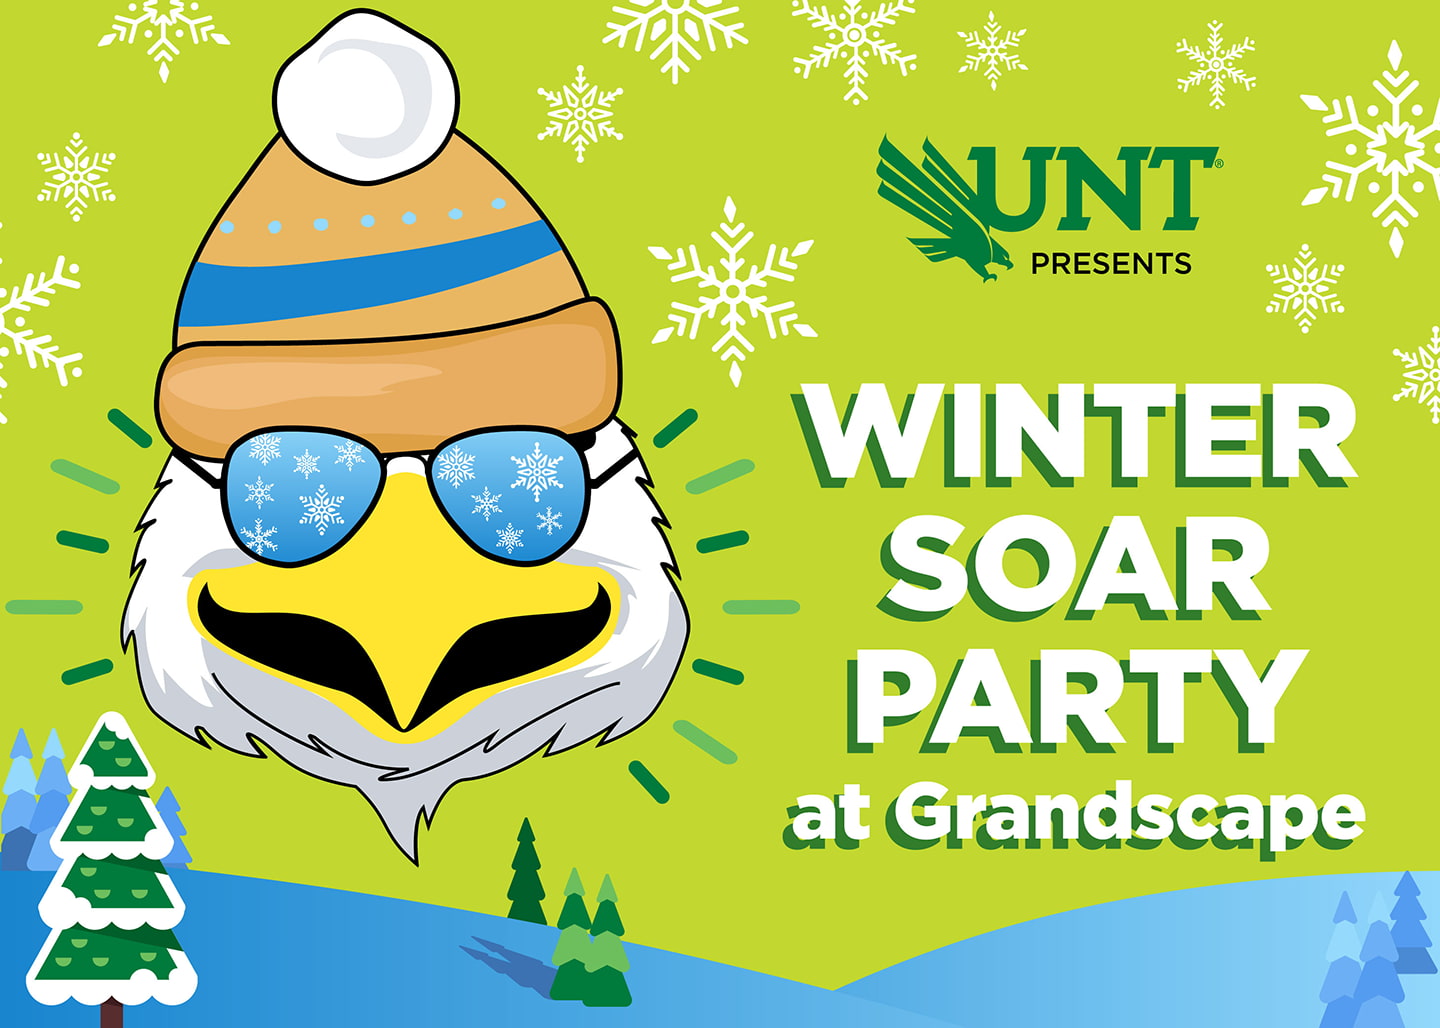 The Winter Soar Party at Grandscape artwork with Scrappy the Eagle mascot in a winter scene wearing funky sunglasses and a knit hat.